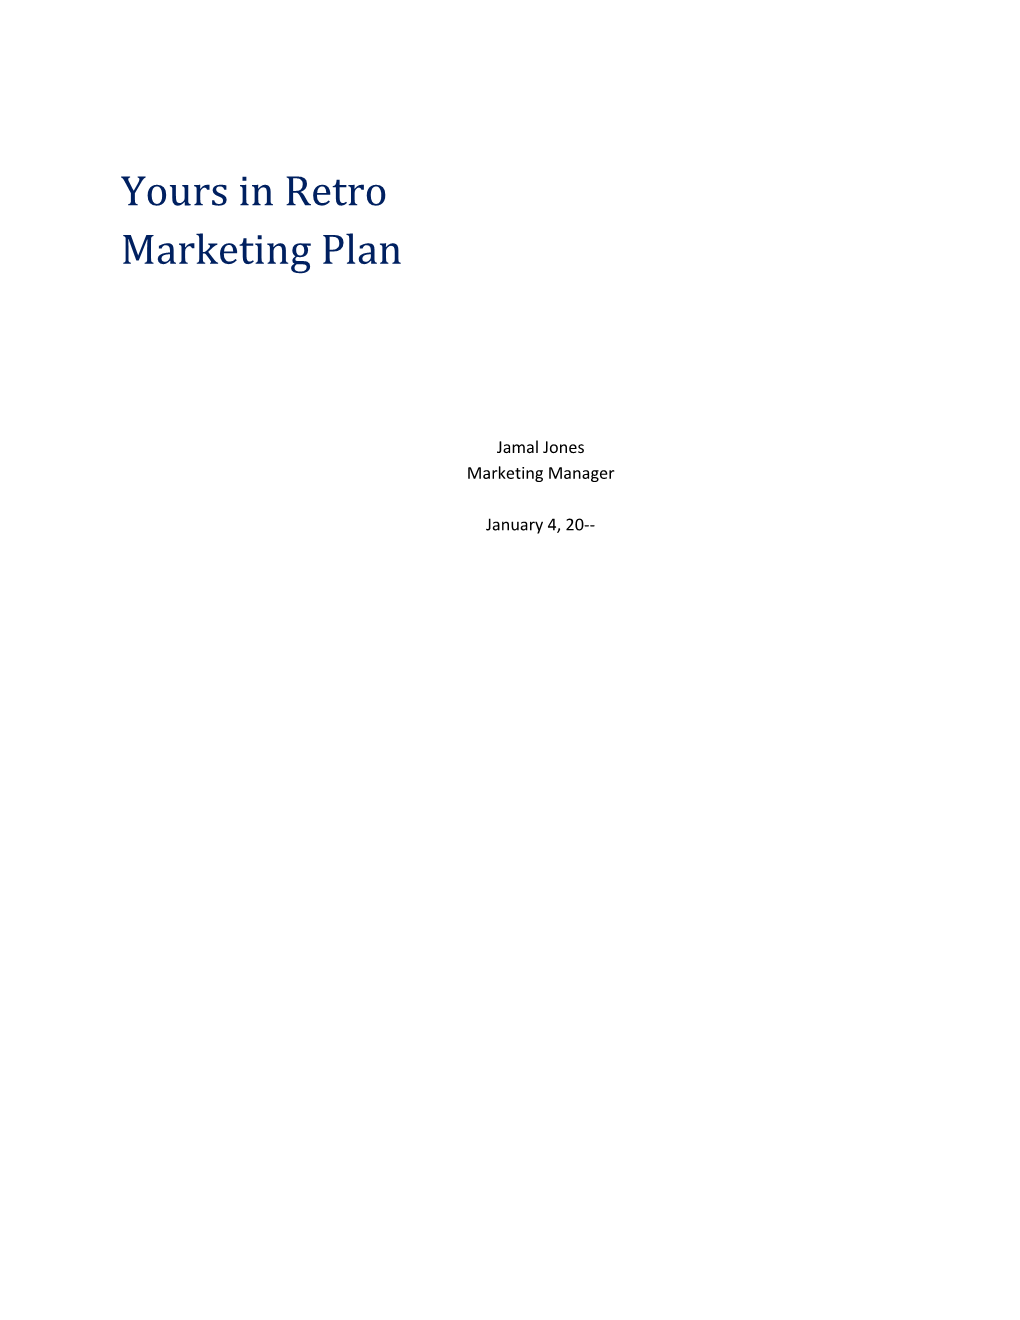 Yours in Retro Marketing Plan